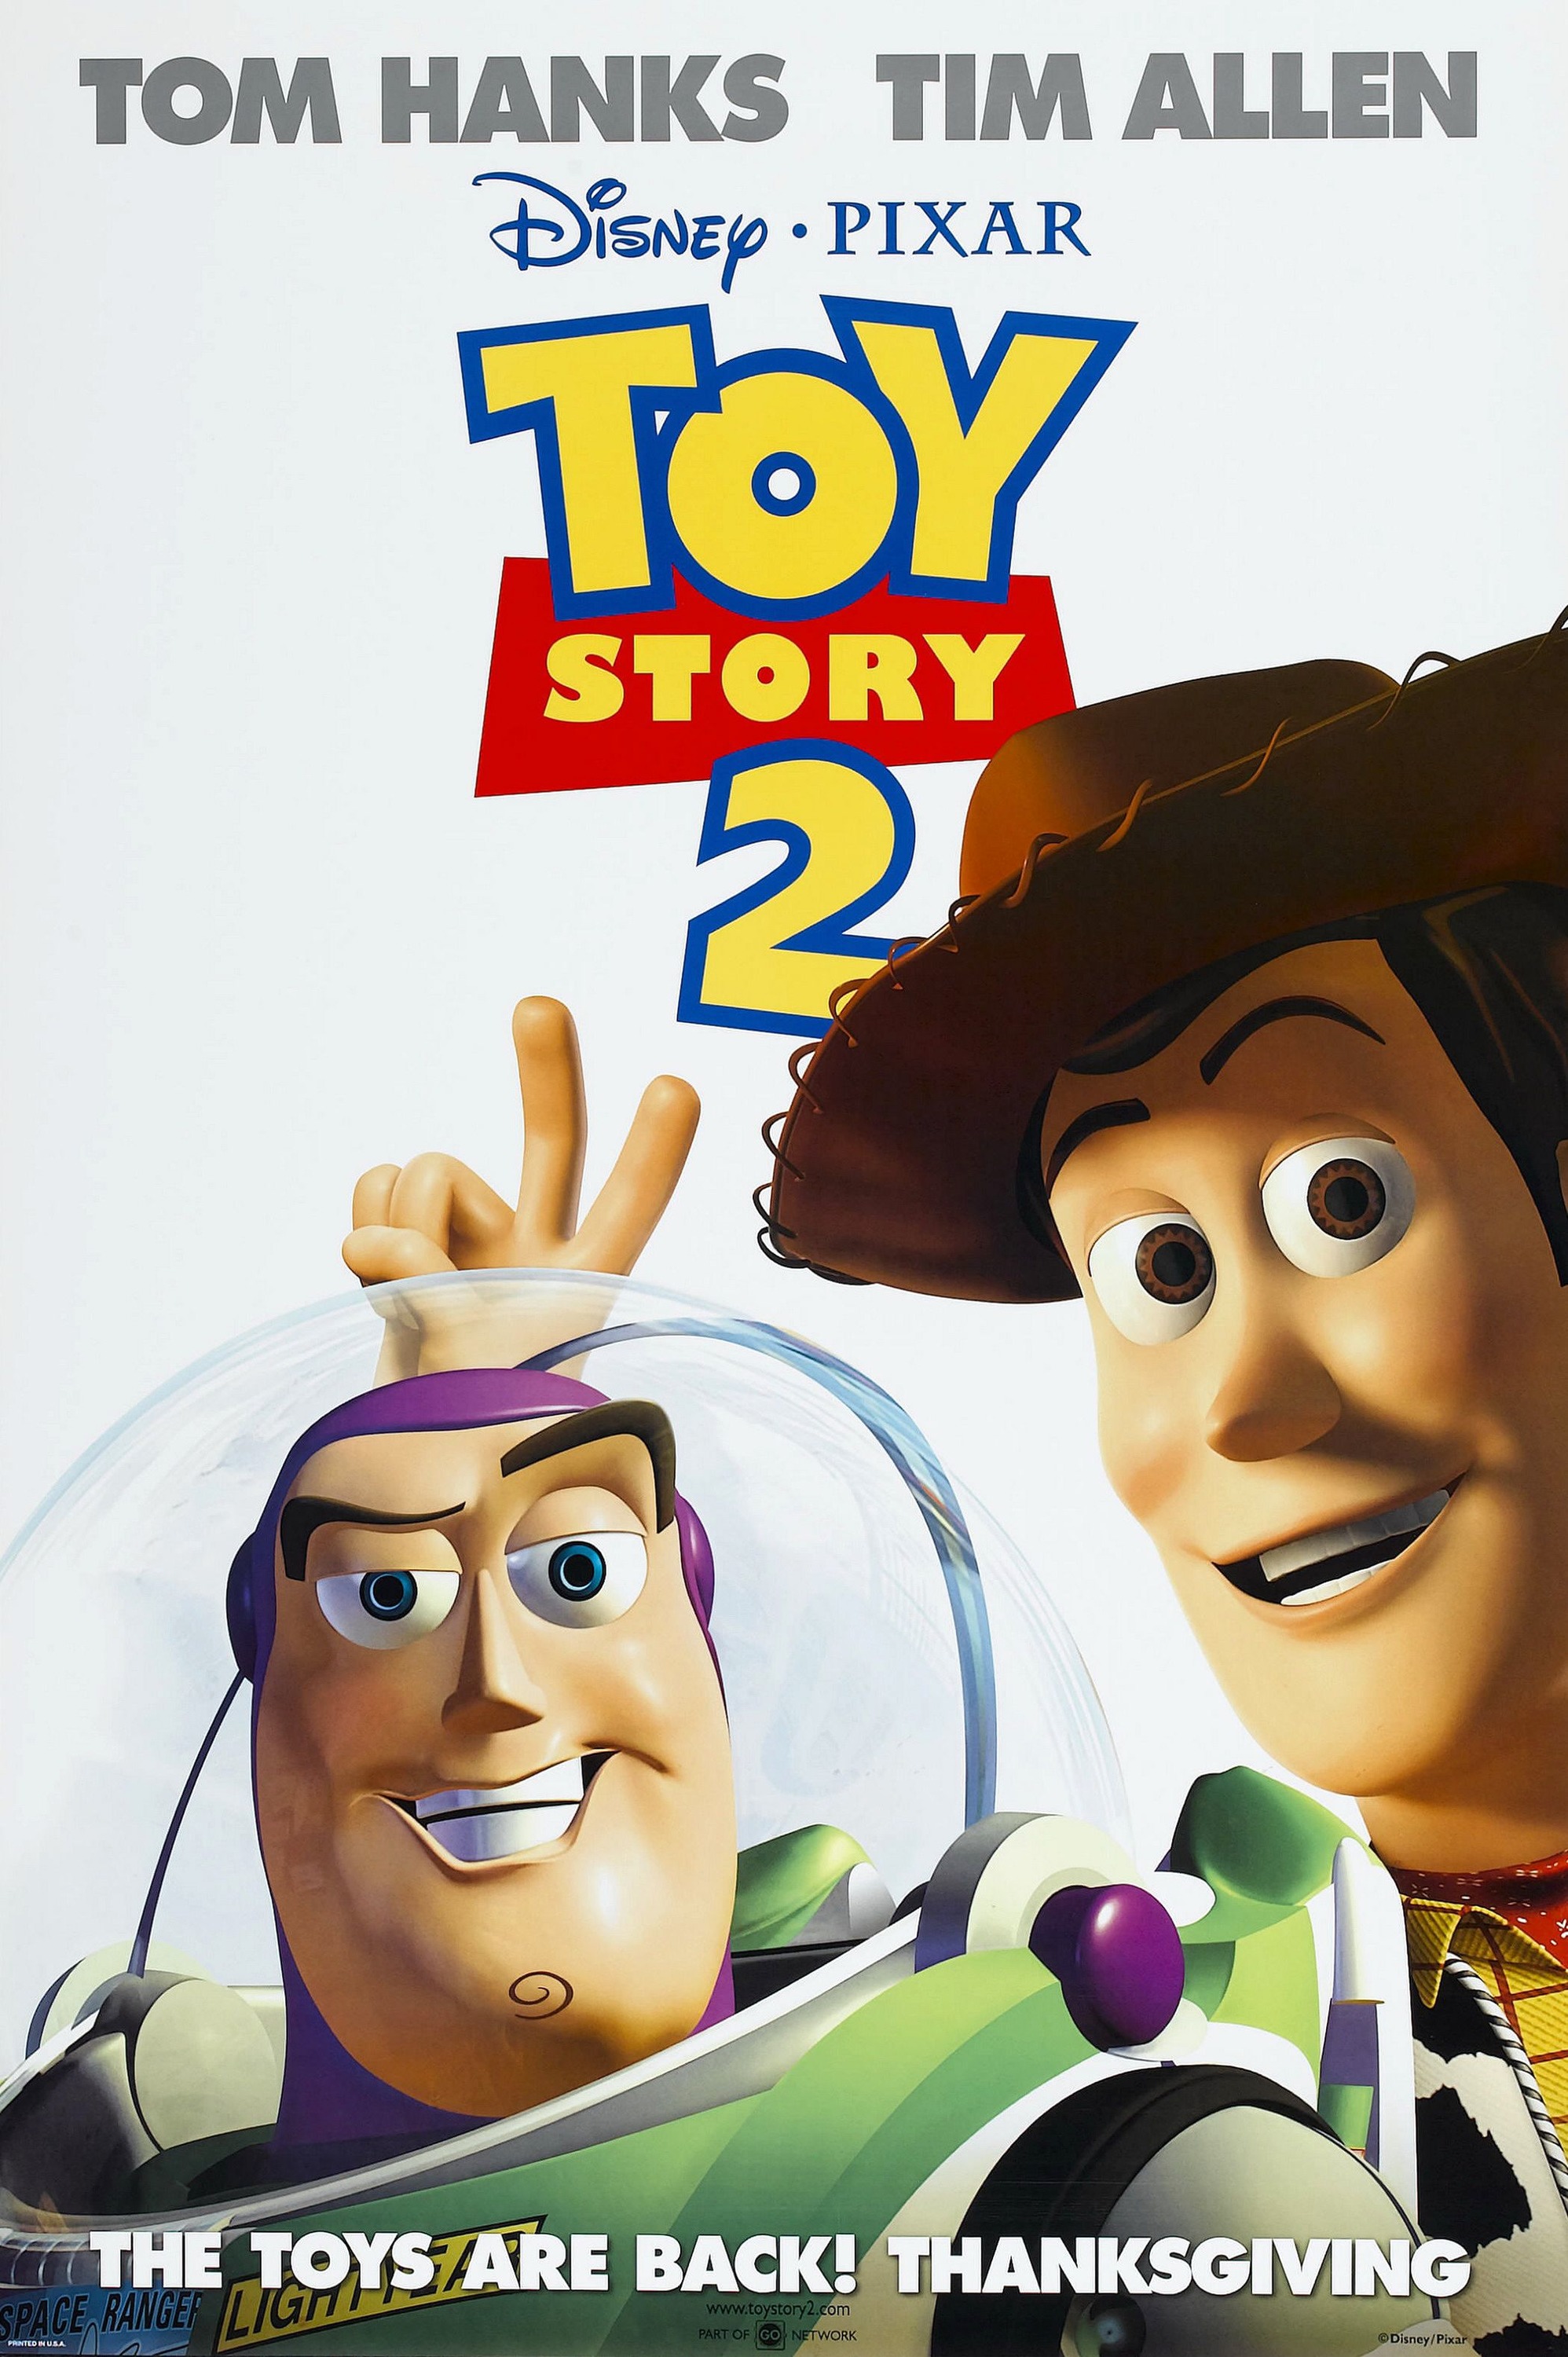 Disney Pixar Dvds- Toy Story, Toy Story 2, Incredibles and Ratatouille.